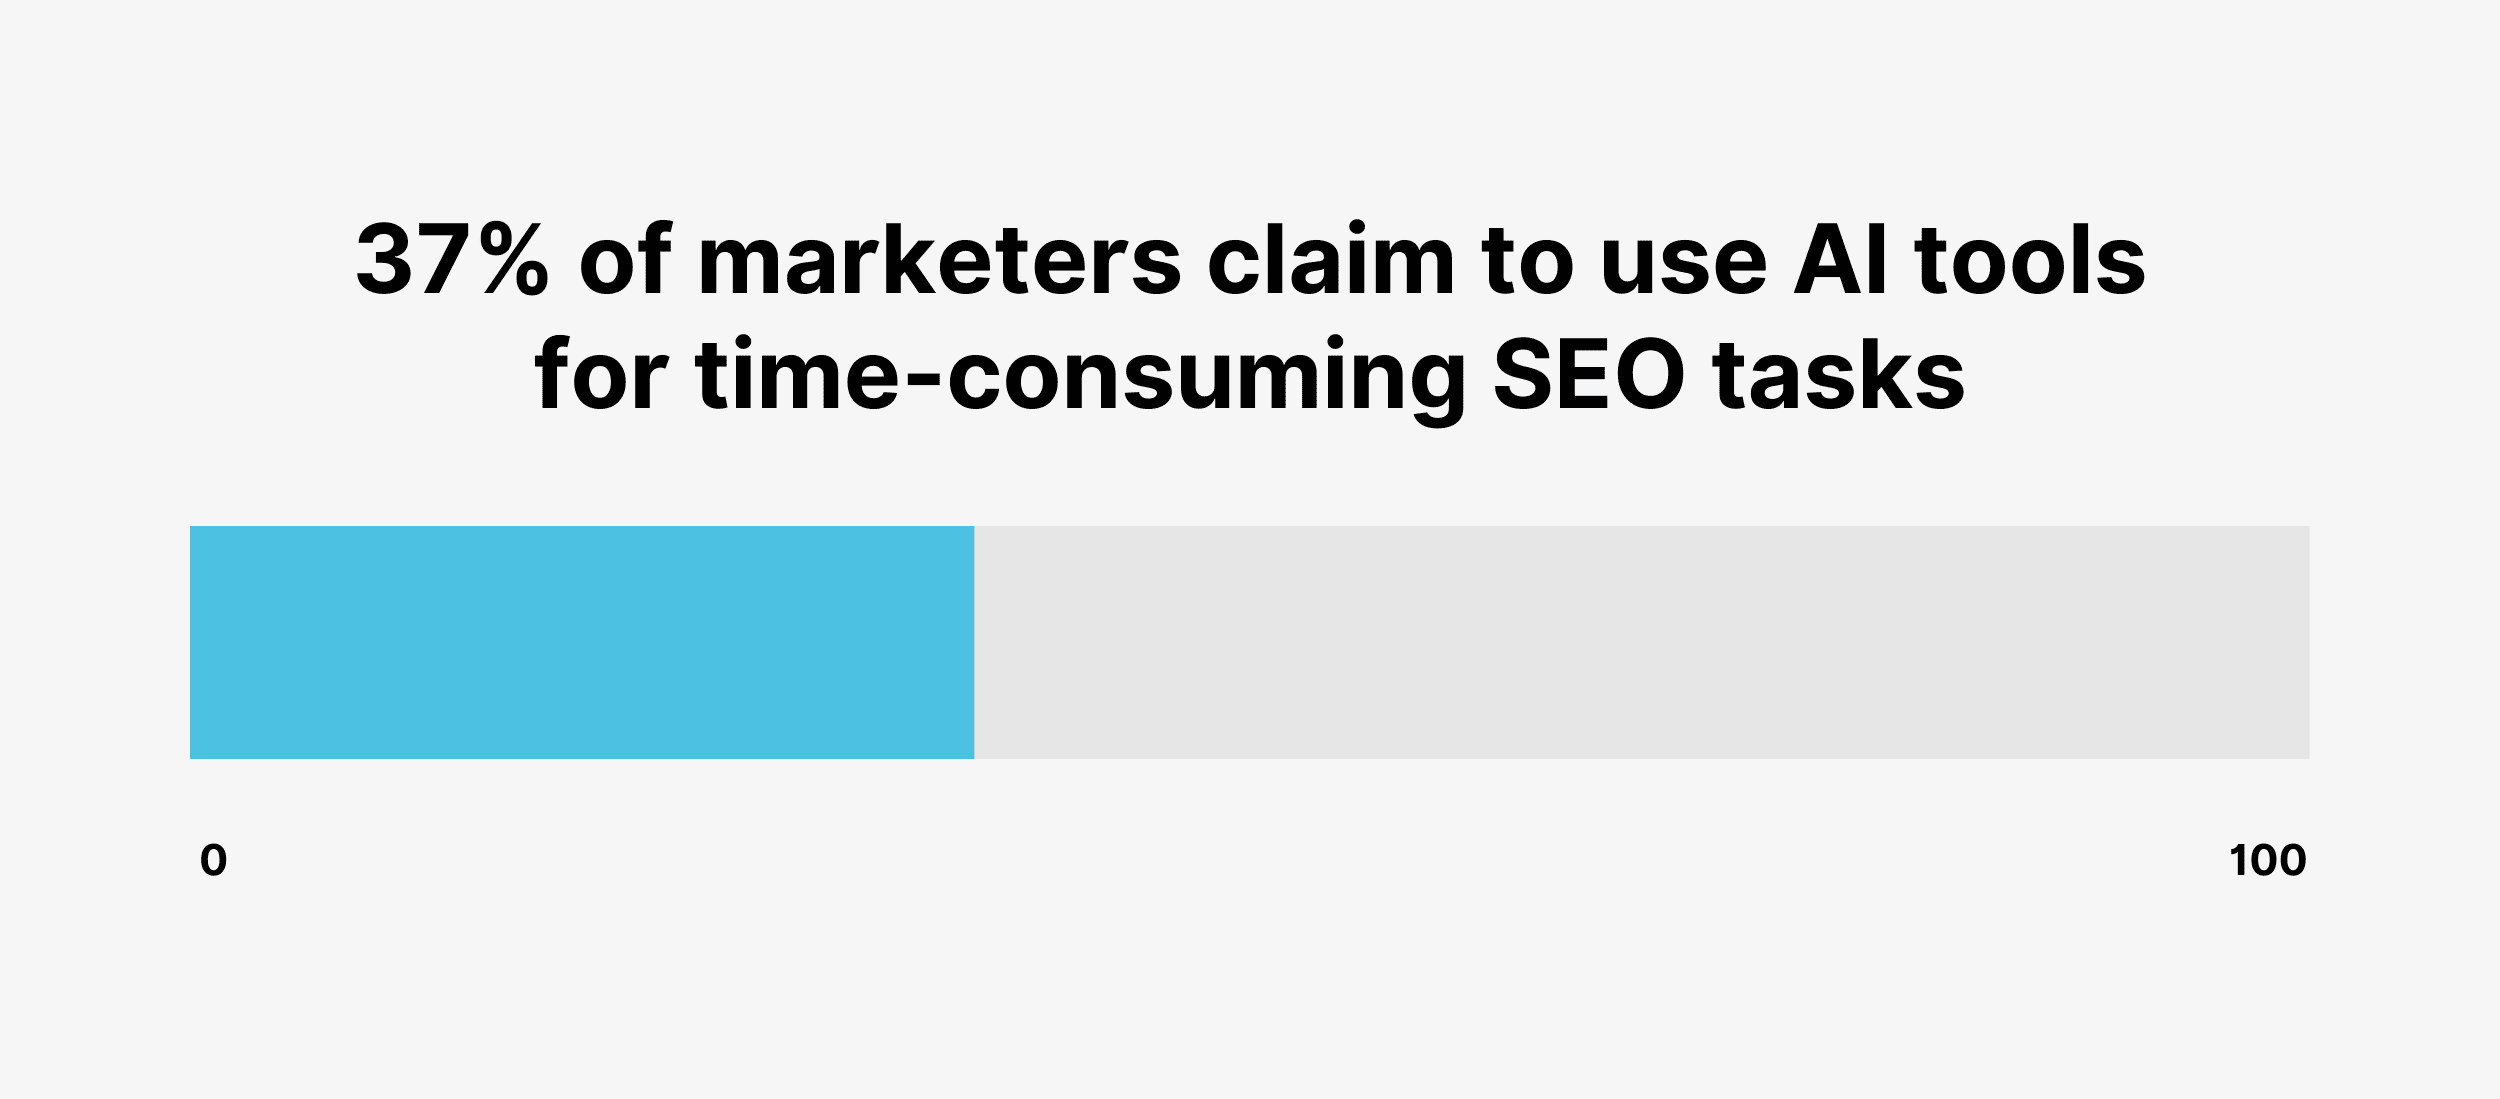 37% of marketers claim to use AI tools for time-consuming SEO tasks